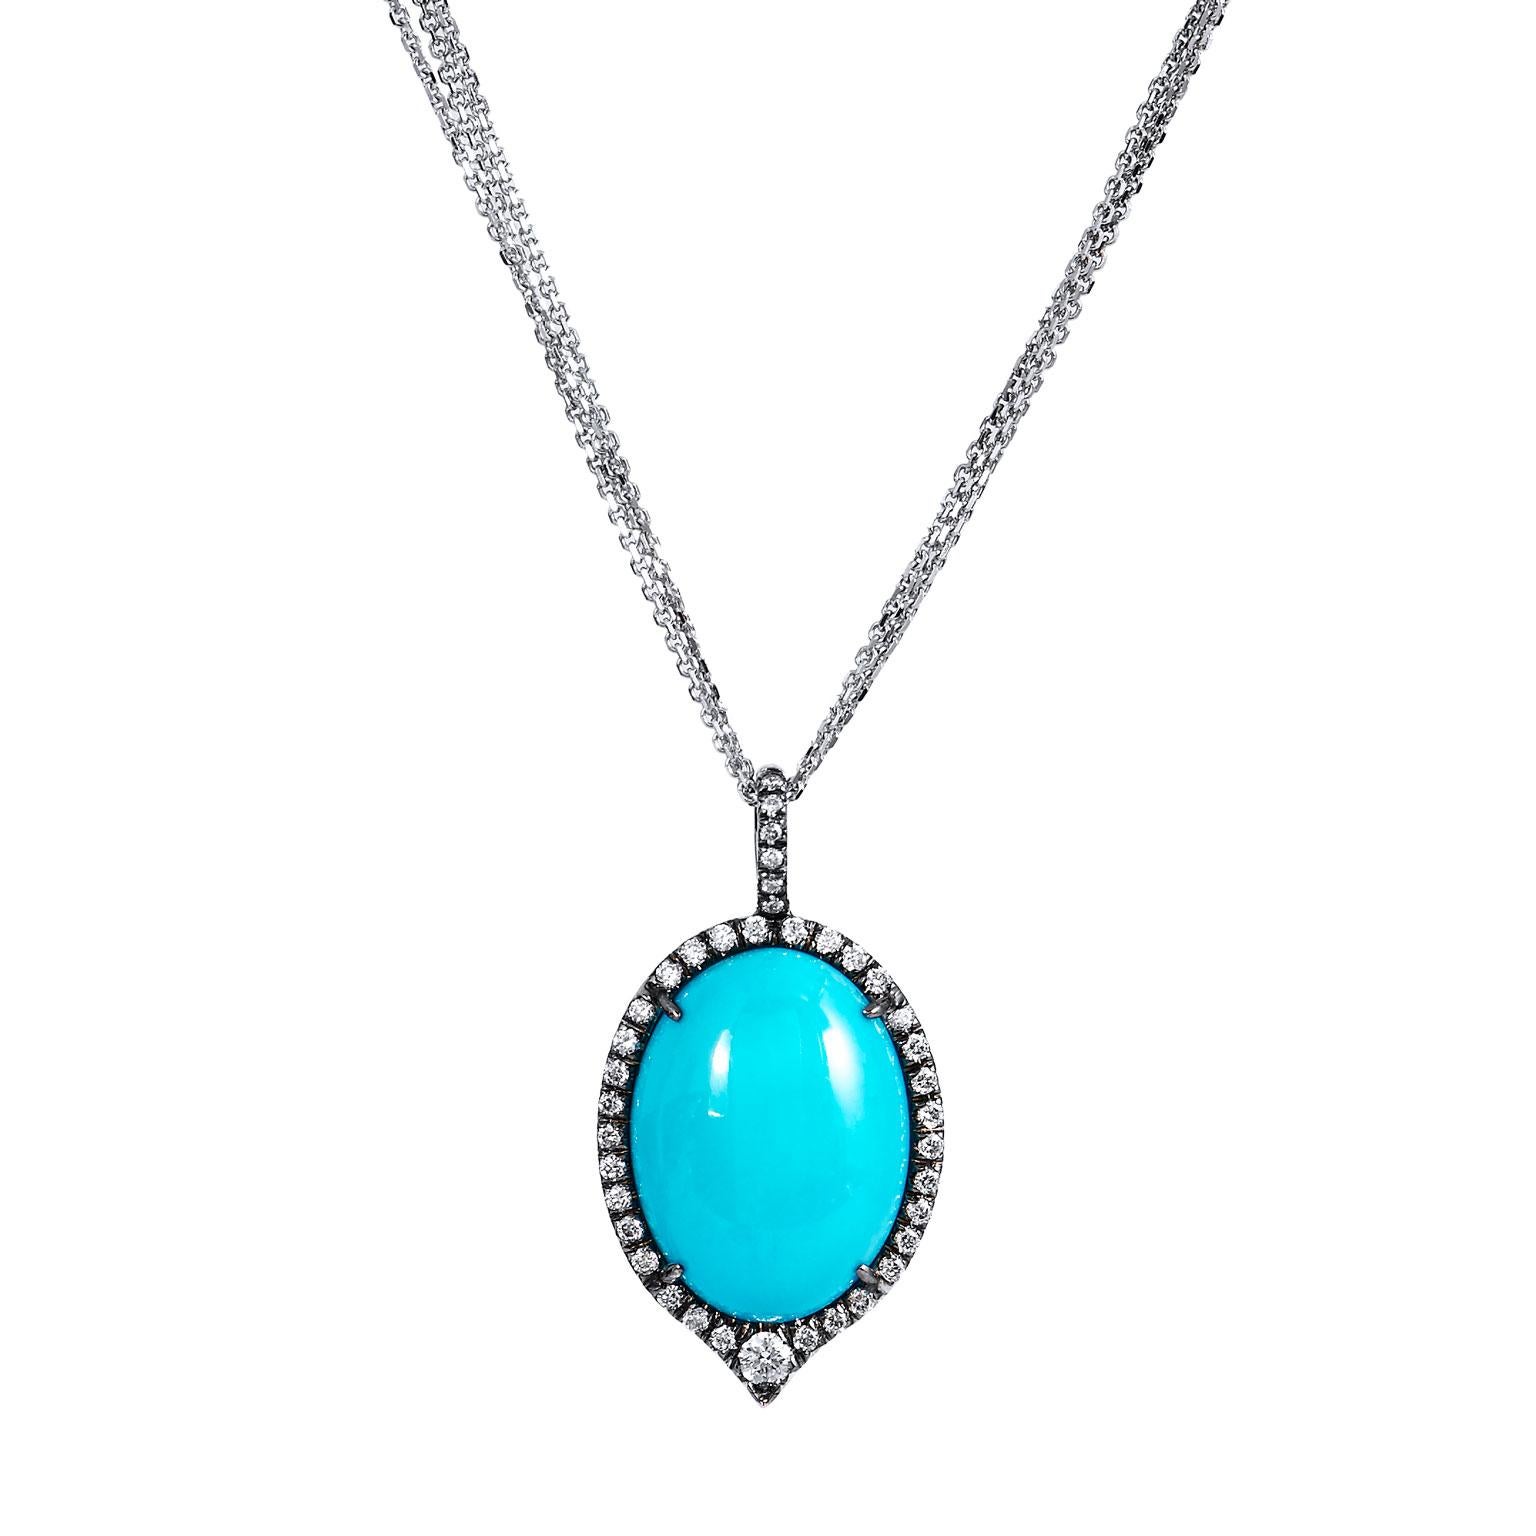 H&H Handmade Turquoise White Gold Diamond Pendant Necklace

A striking 16 millimeter by 12 millimeter turquoise is set at center and fashioned in 18 karat white gold in this handcrafted H&H pendant. Turquoise is a stone of protection- strong and